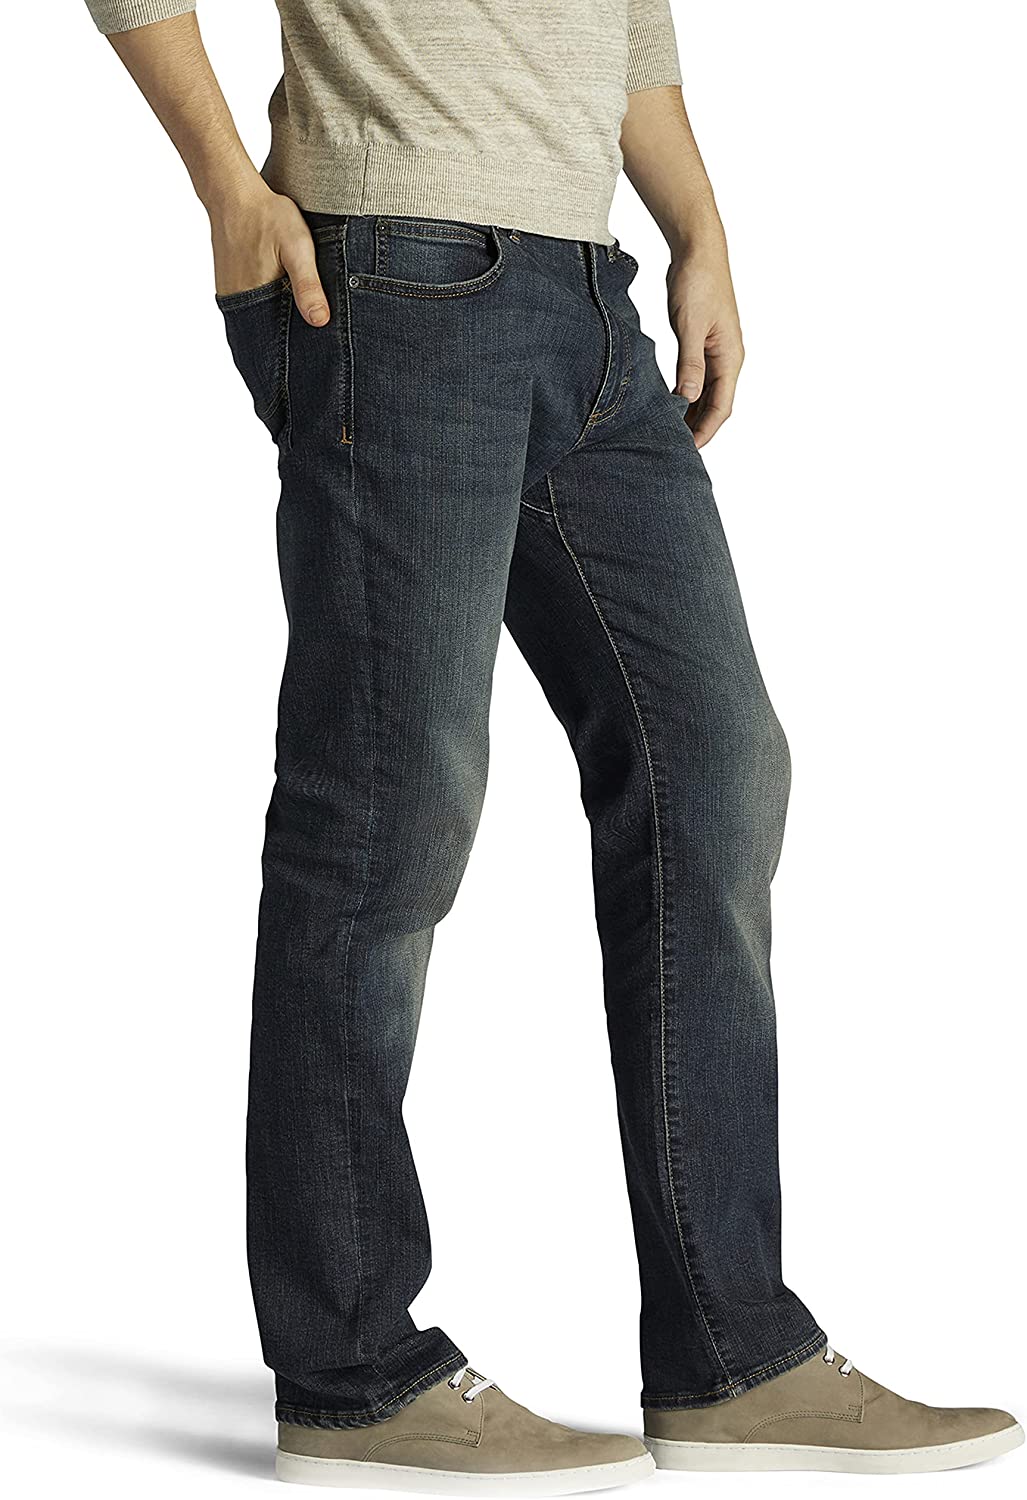 10 Best Jeans for Men with Big Thigh That Will Make You Look Smart